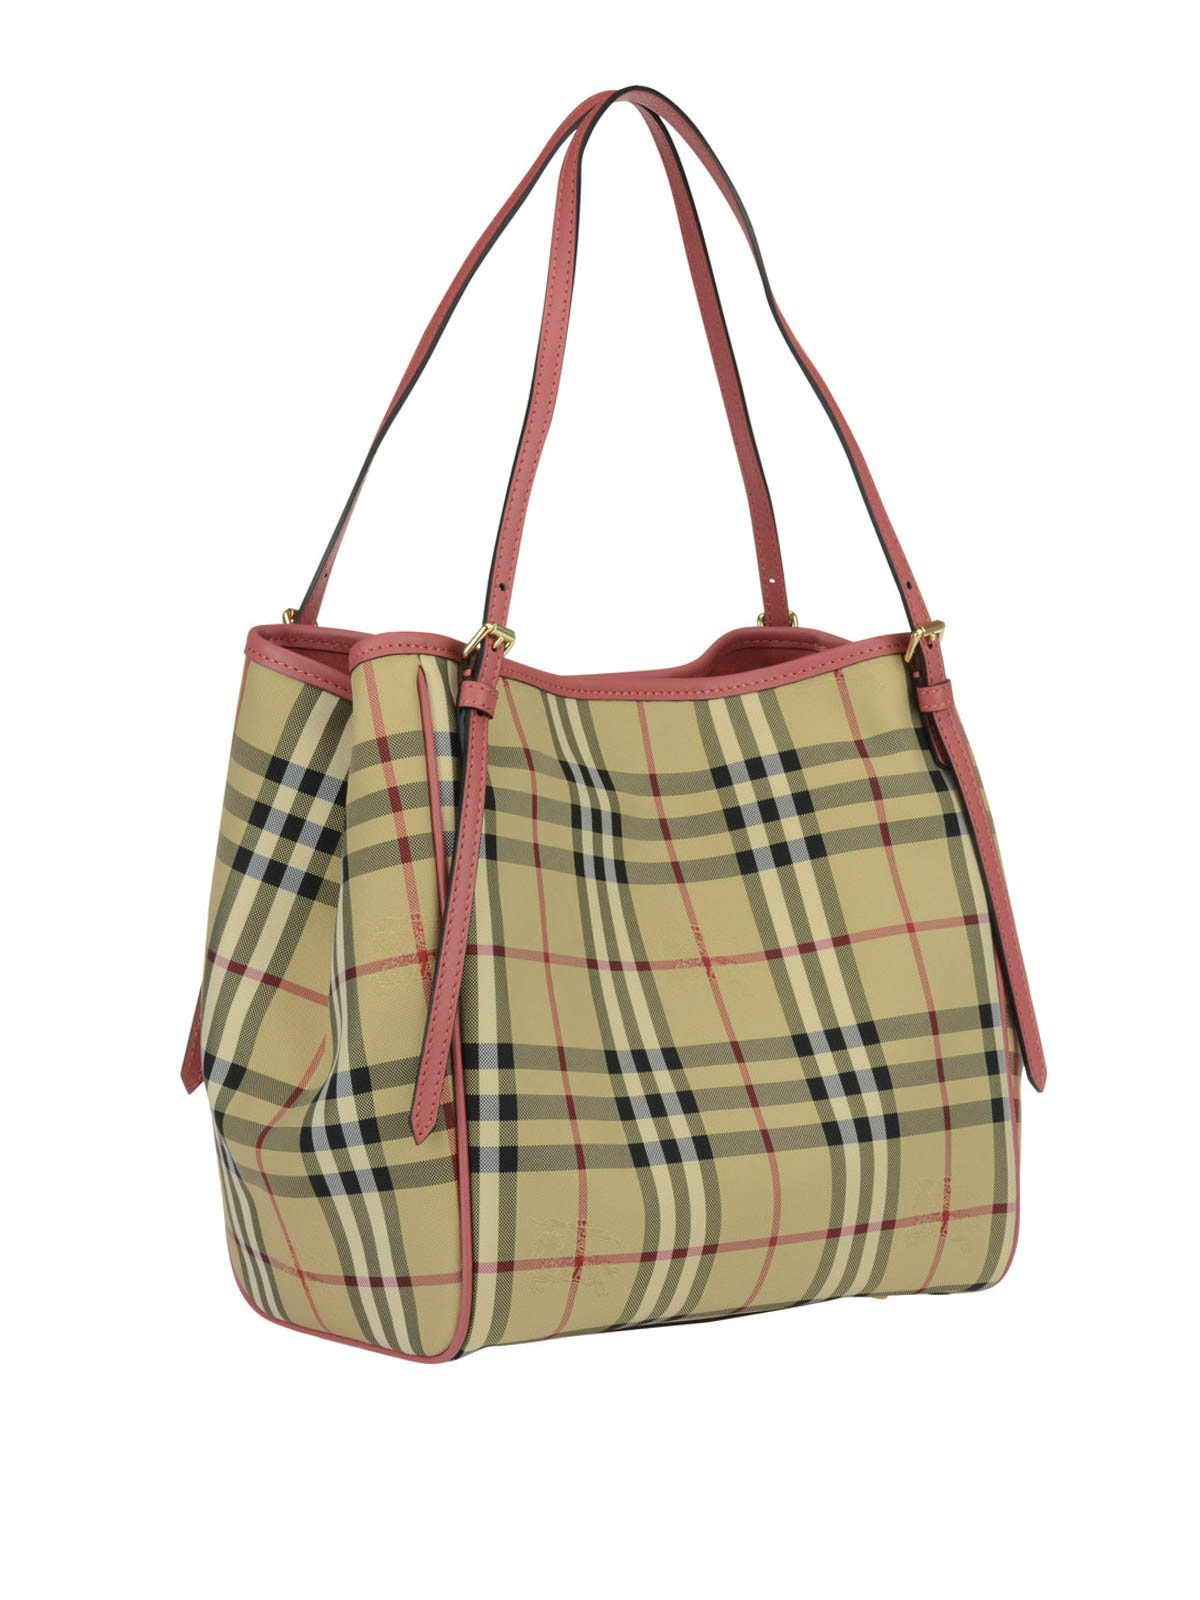 Burberry - The Canter small tote 